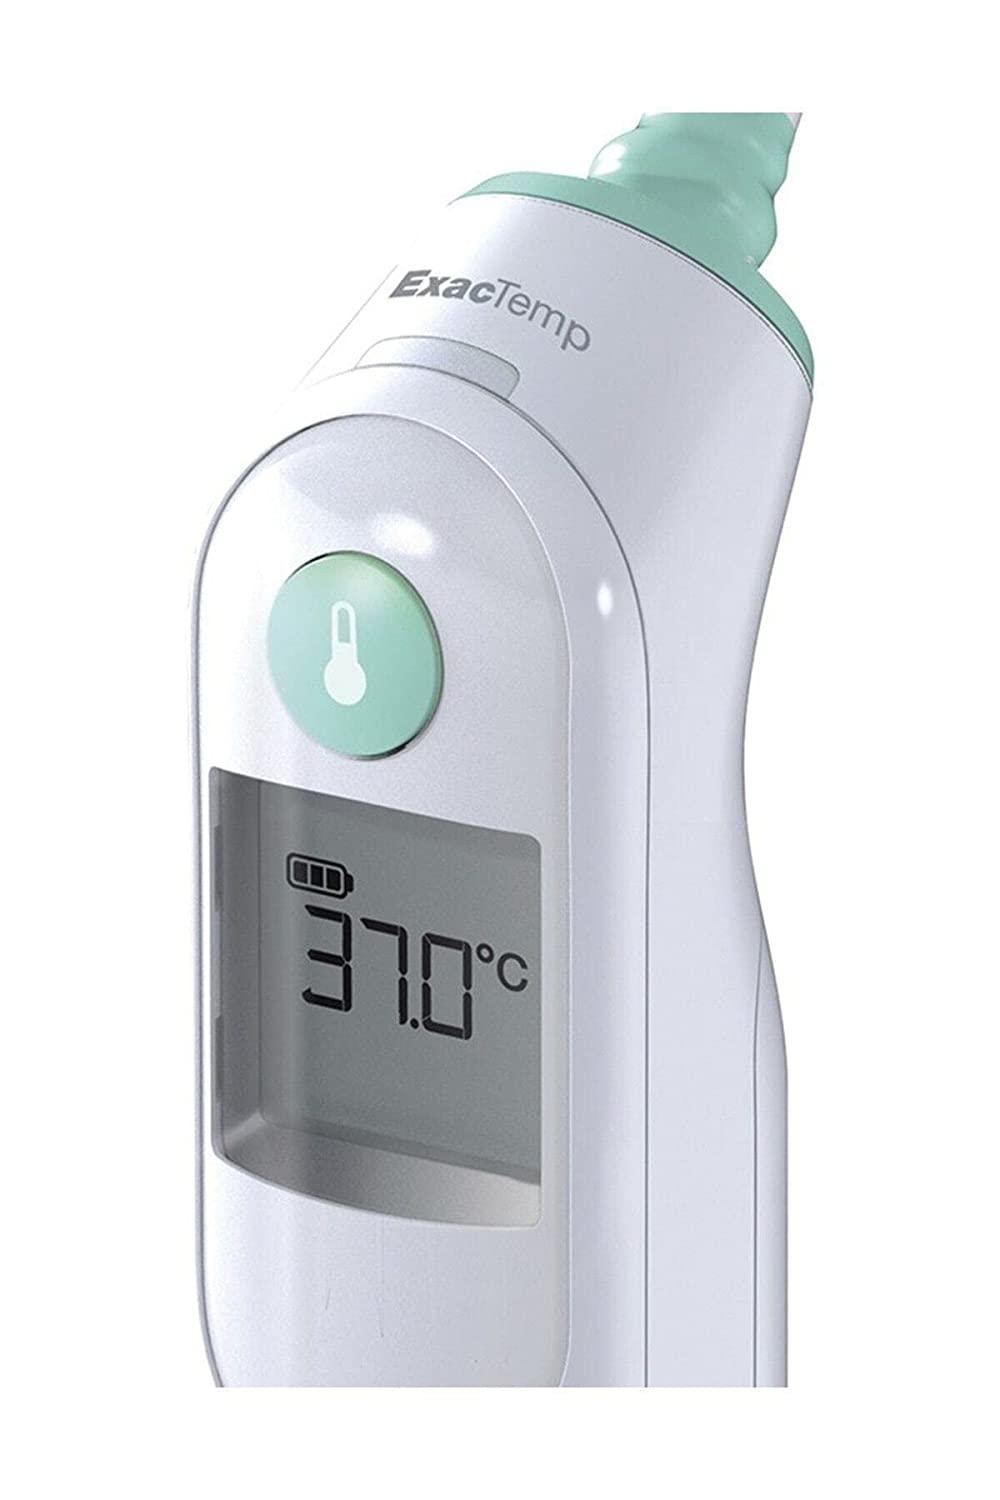 Raad Misschien ader Braun ThermoScan IRT6020 Digital Ear Thermometer